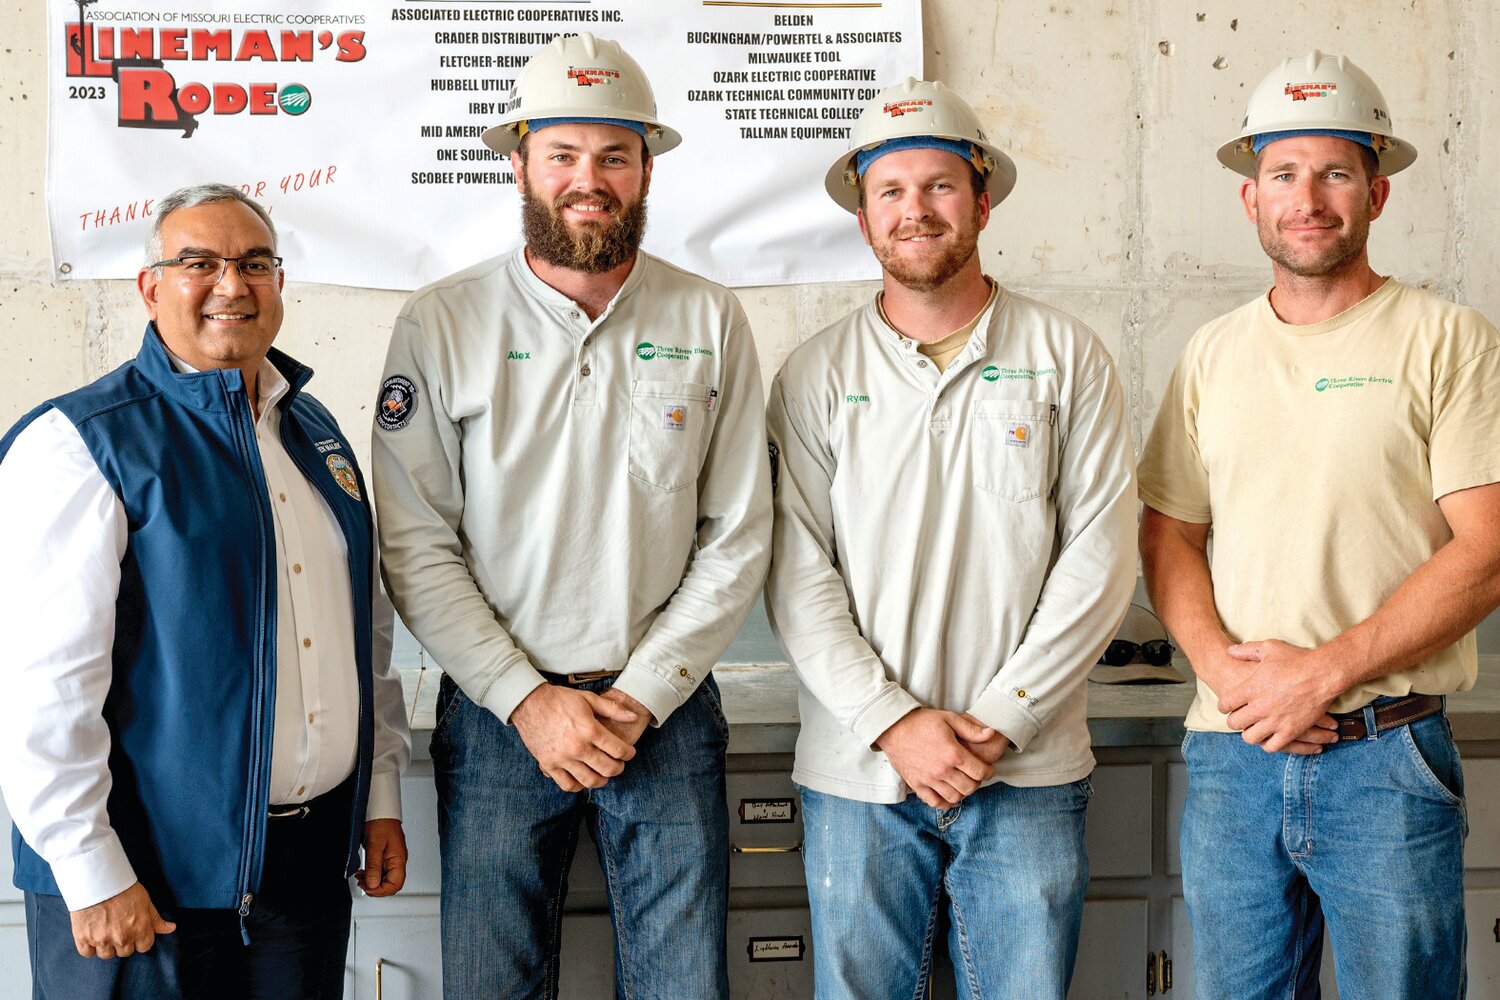 Missouri State Treasurer Vivek Malek, left, presents TREC linemen Alex Buschjost, Ryan Deeken, and Cory Kleffner, with their second-place hardhat trophies, at the sixth annual Lineman’s Rodeo recently. In addition, they each received first-place honors in timed individual events.